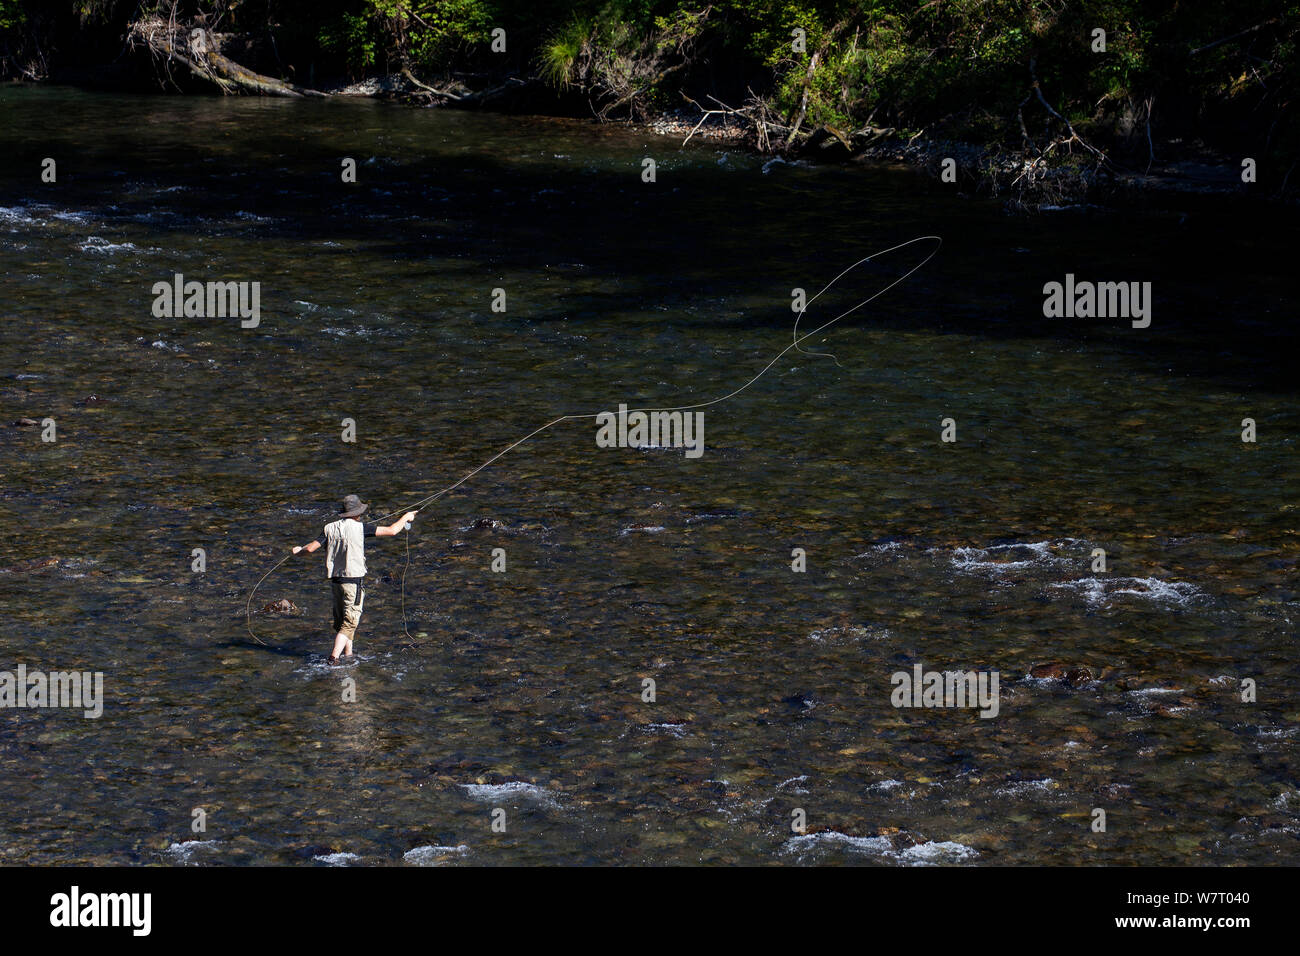 Man fly fishing on the Middle Fork of the Snoqualme River near North Bend, Washington, USA, July 2013. Model released. Stock Photo